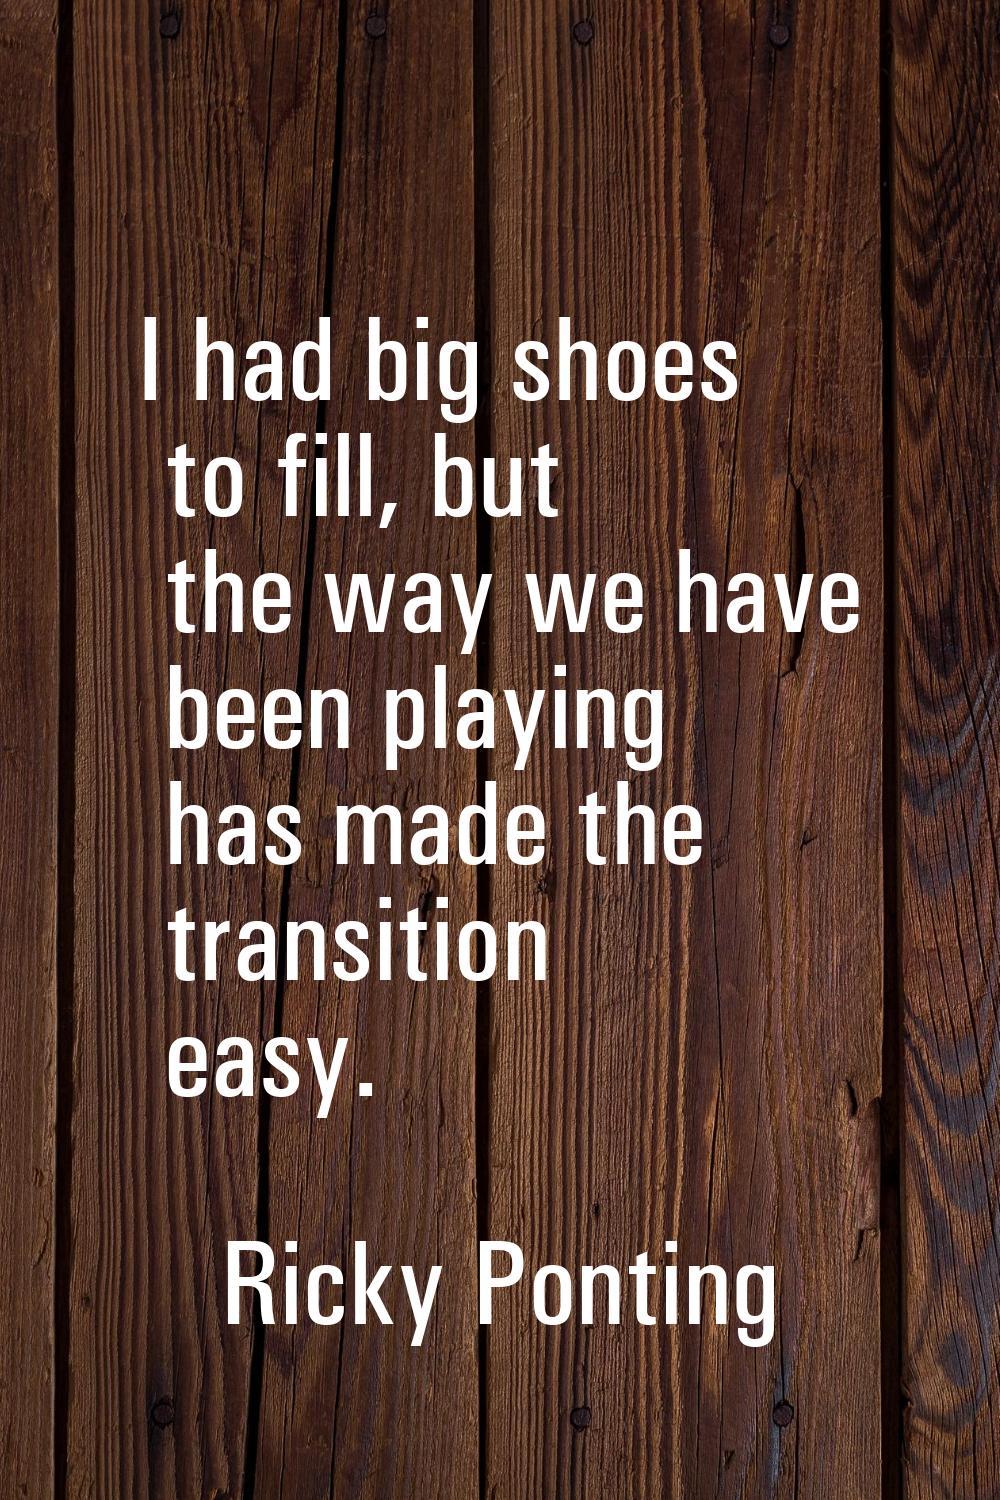 I had big shoes to fill, but the way we have been playing has made the transition easy.